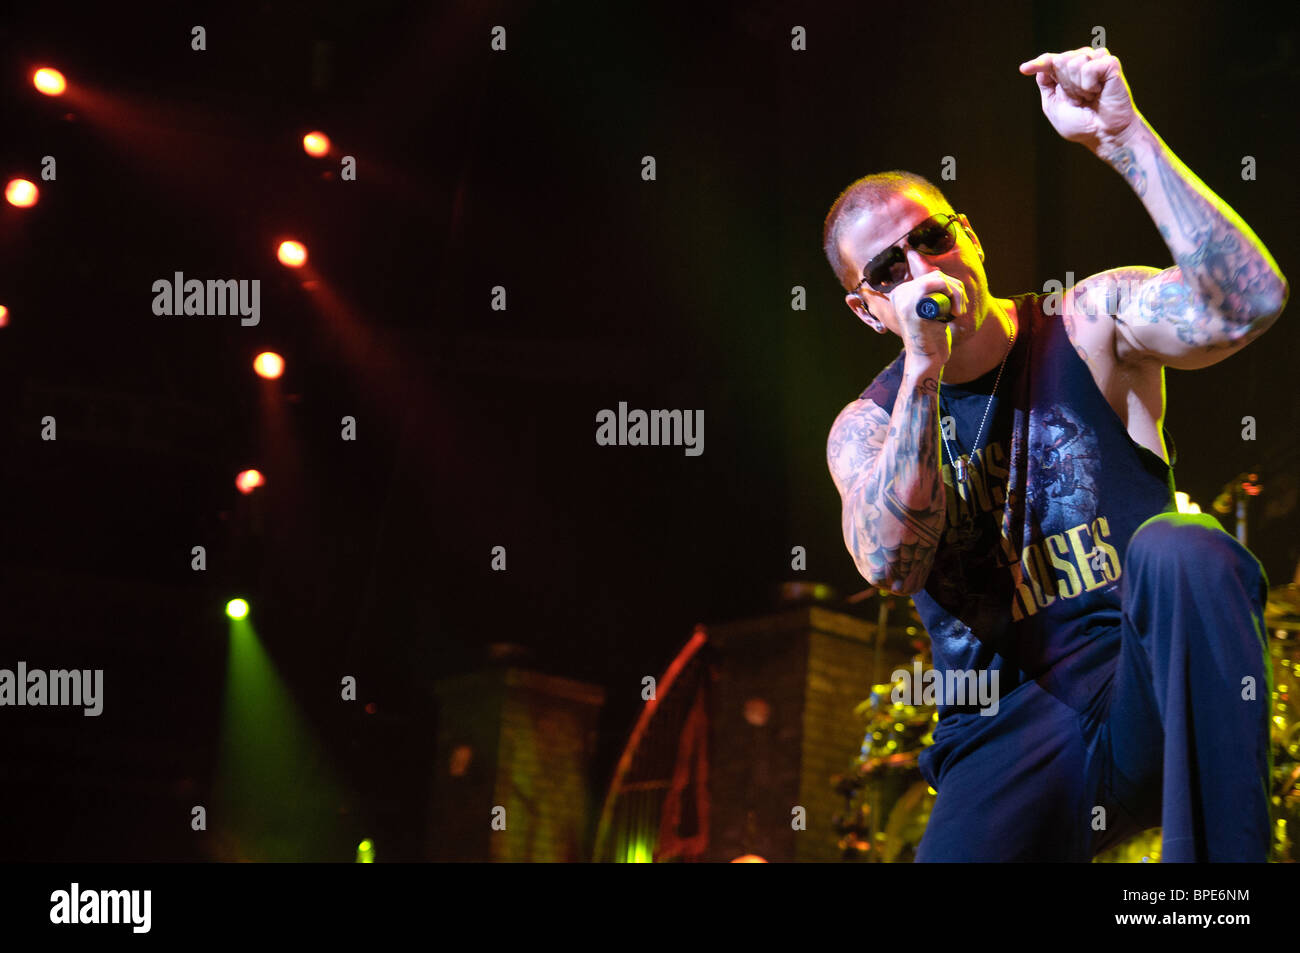 Avenged Sevenfold's M.Shadows performing during the Rockstar Uproar Tour at Nationwide Arena in Columbus, Ohio Stock Photo